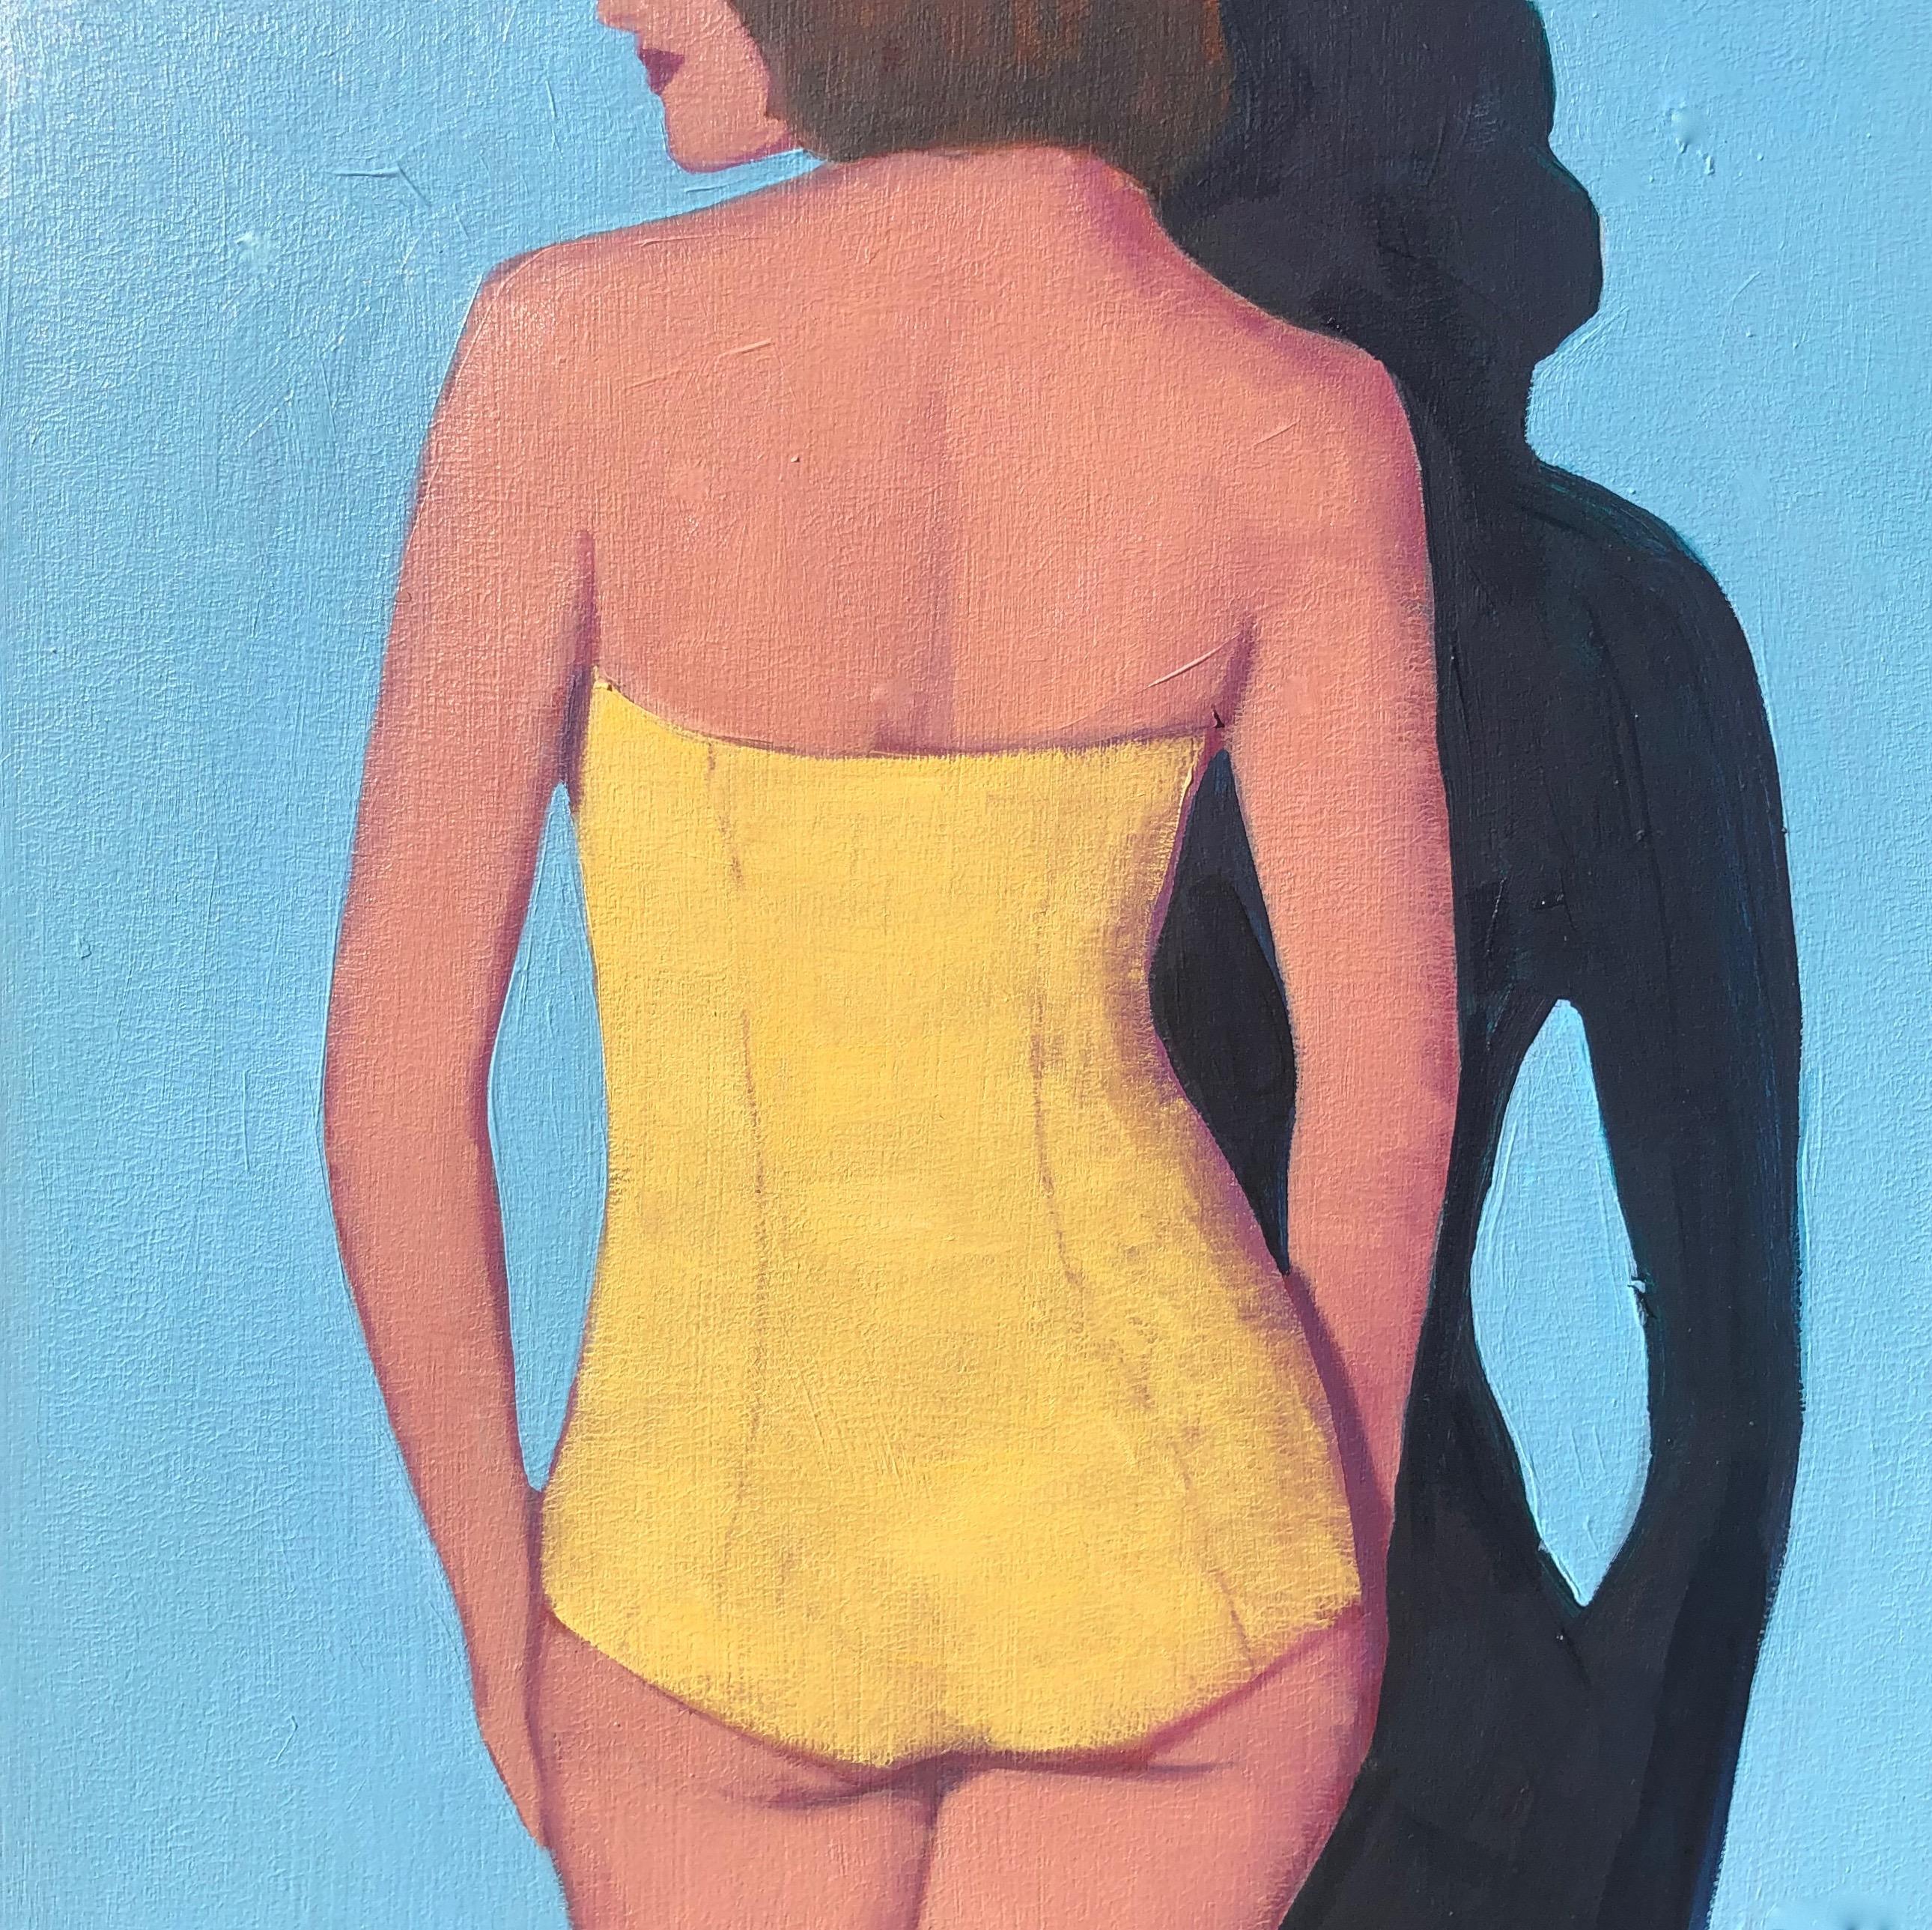 T.S. Harris Figurative Painting - "Yellow Suit and Shadow"